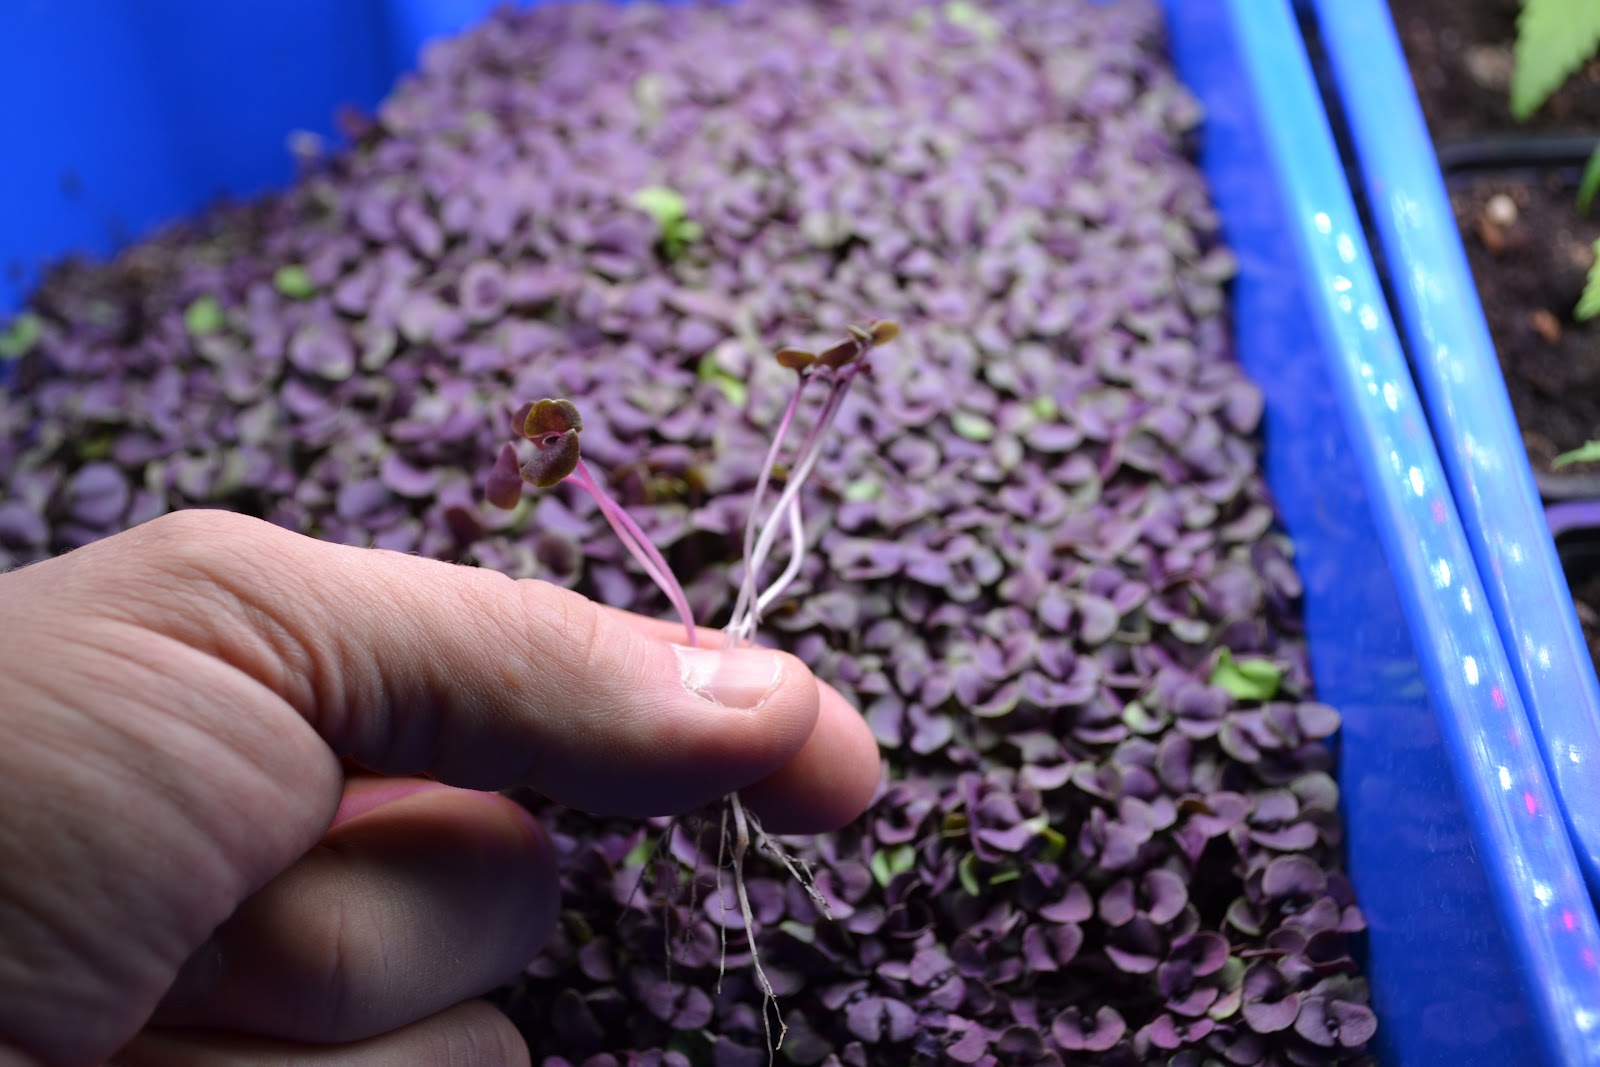 Farmer Jer is holding some purple basil microgreen sprouts ready to harvest at 2.5 inches tall, in this file photo.